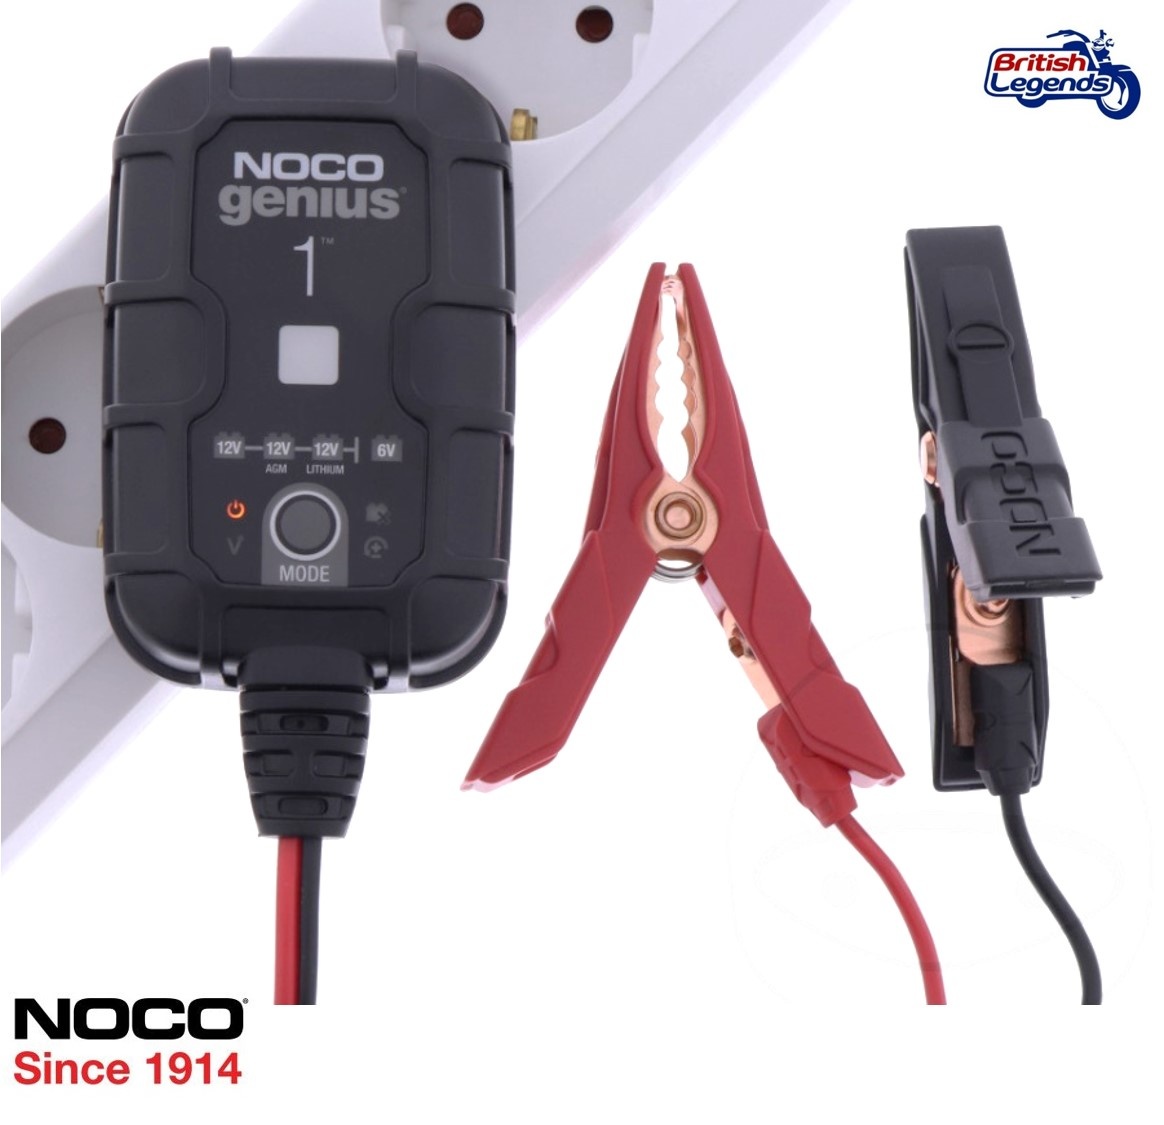 Smart NOCO Battery Charger for motorcycles